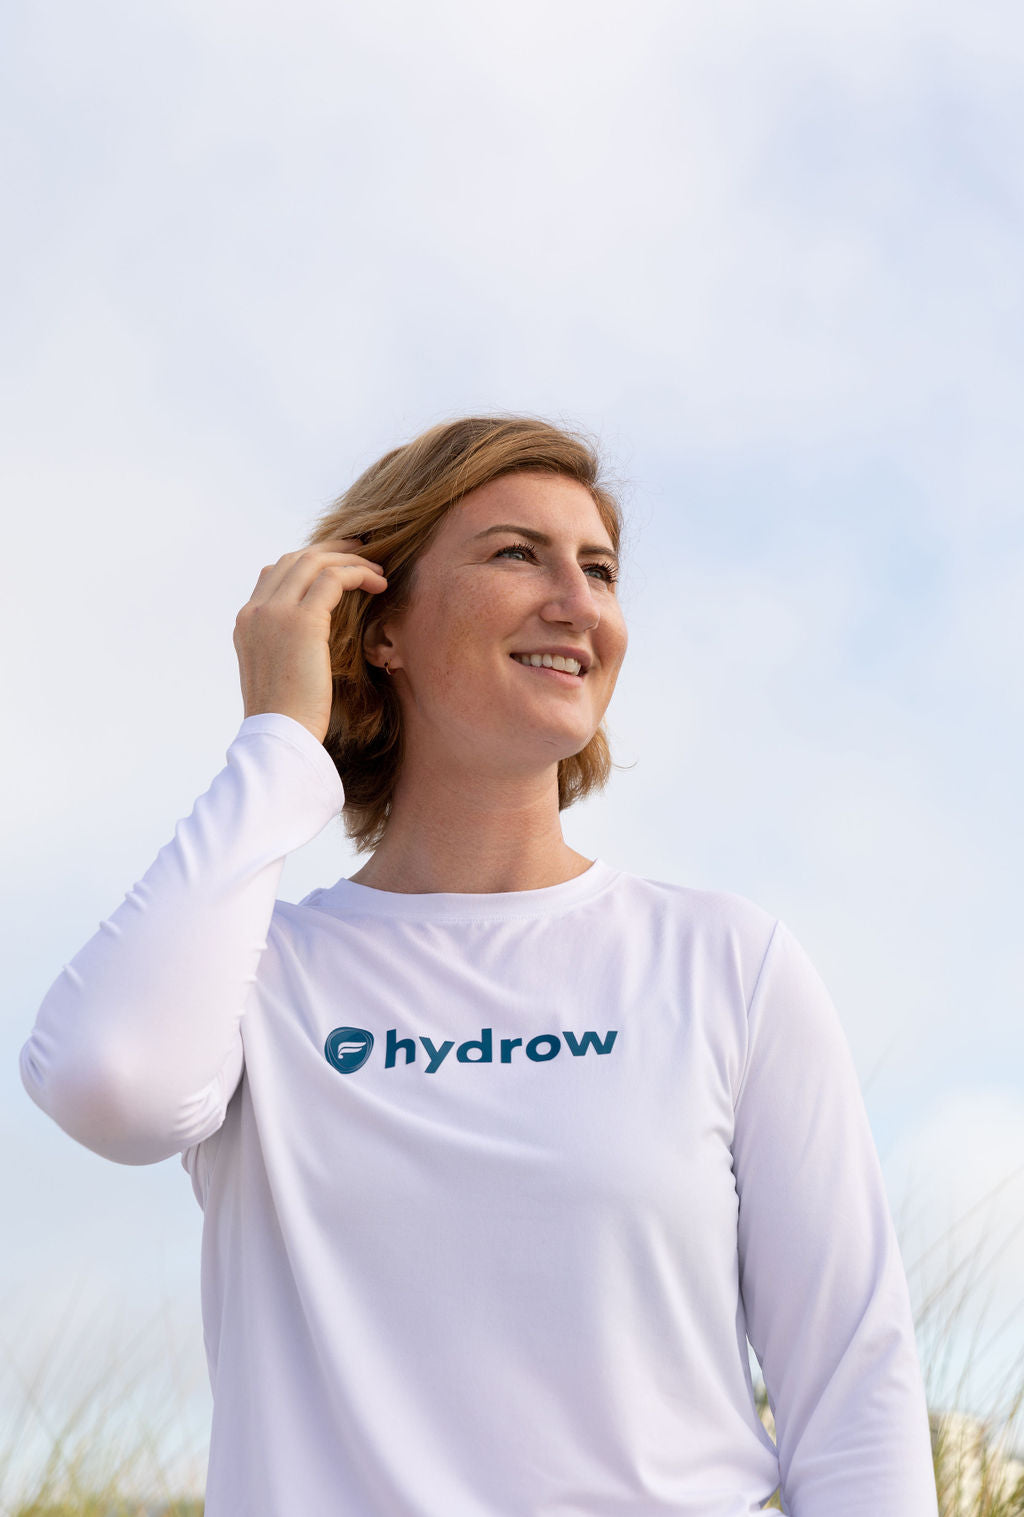 hydrow athlete wearing the dry-flex long-sleeve tee with hydrow fabletics logo on front